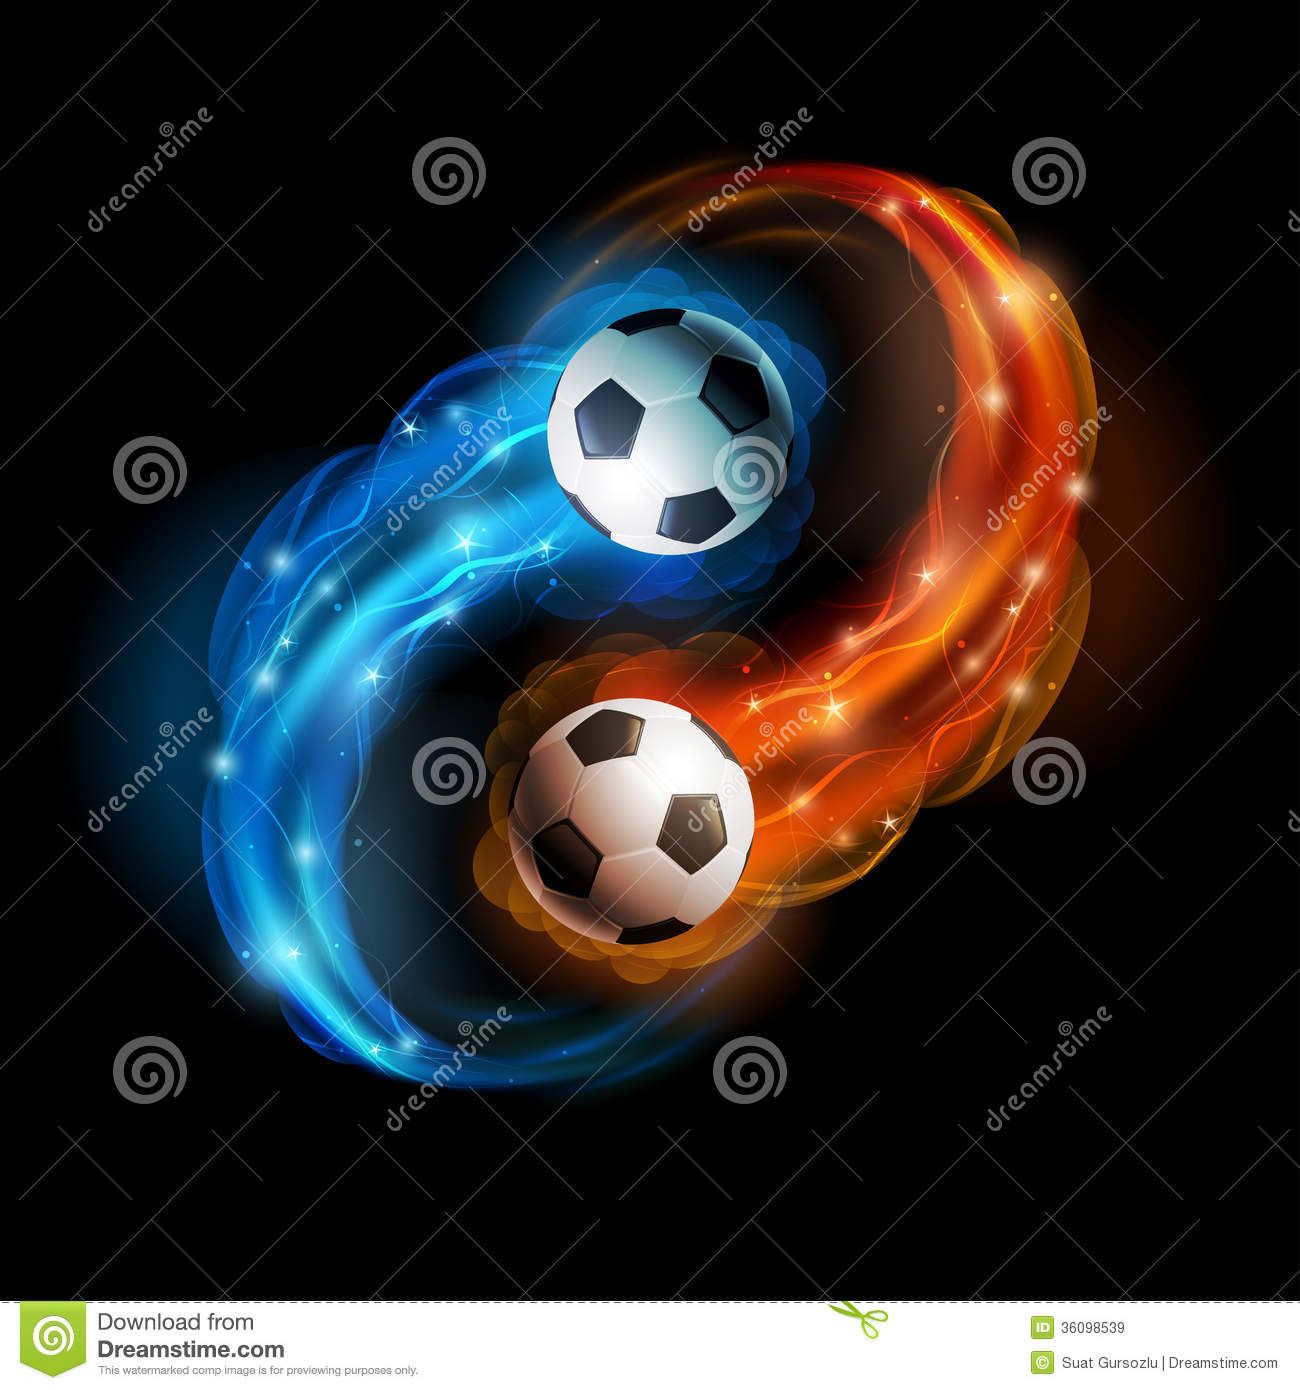 Cool Soccer Ball Wallpapers Wallpapers